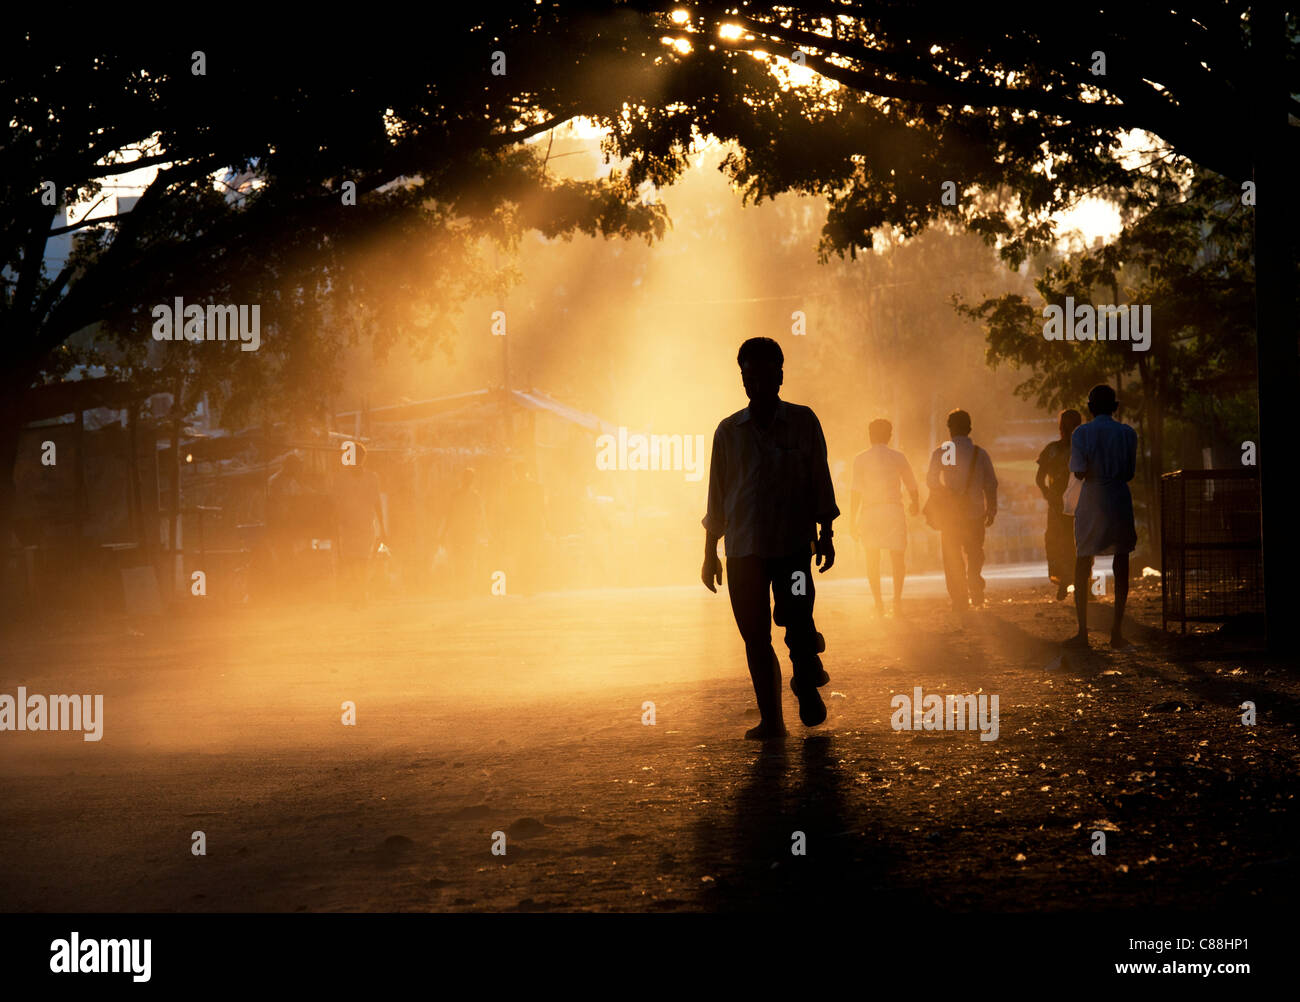 Indian man silhouette walking through tunnel of trees at sunset Stock ... Silhouette Man Walking Tunnel